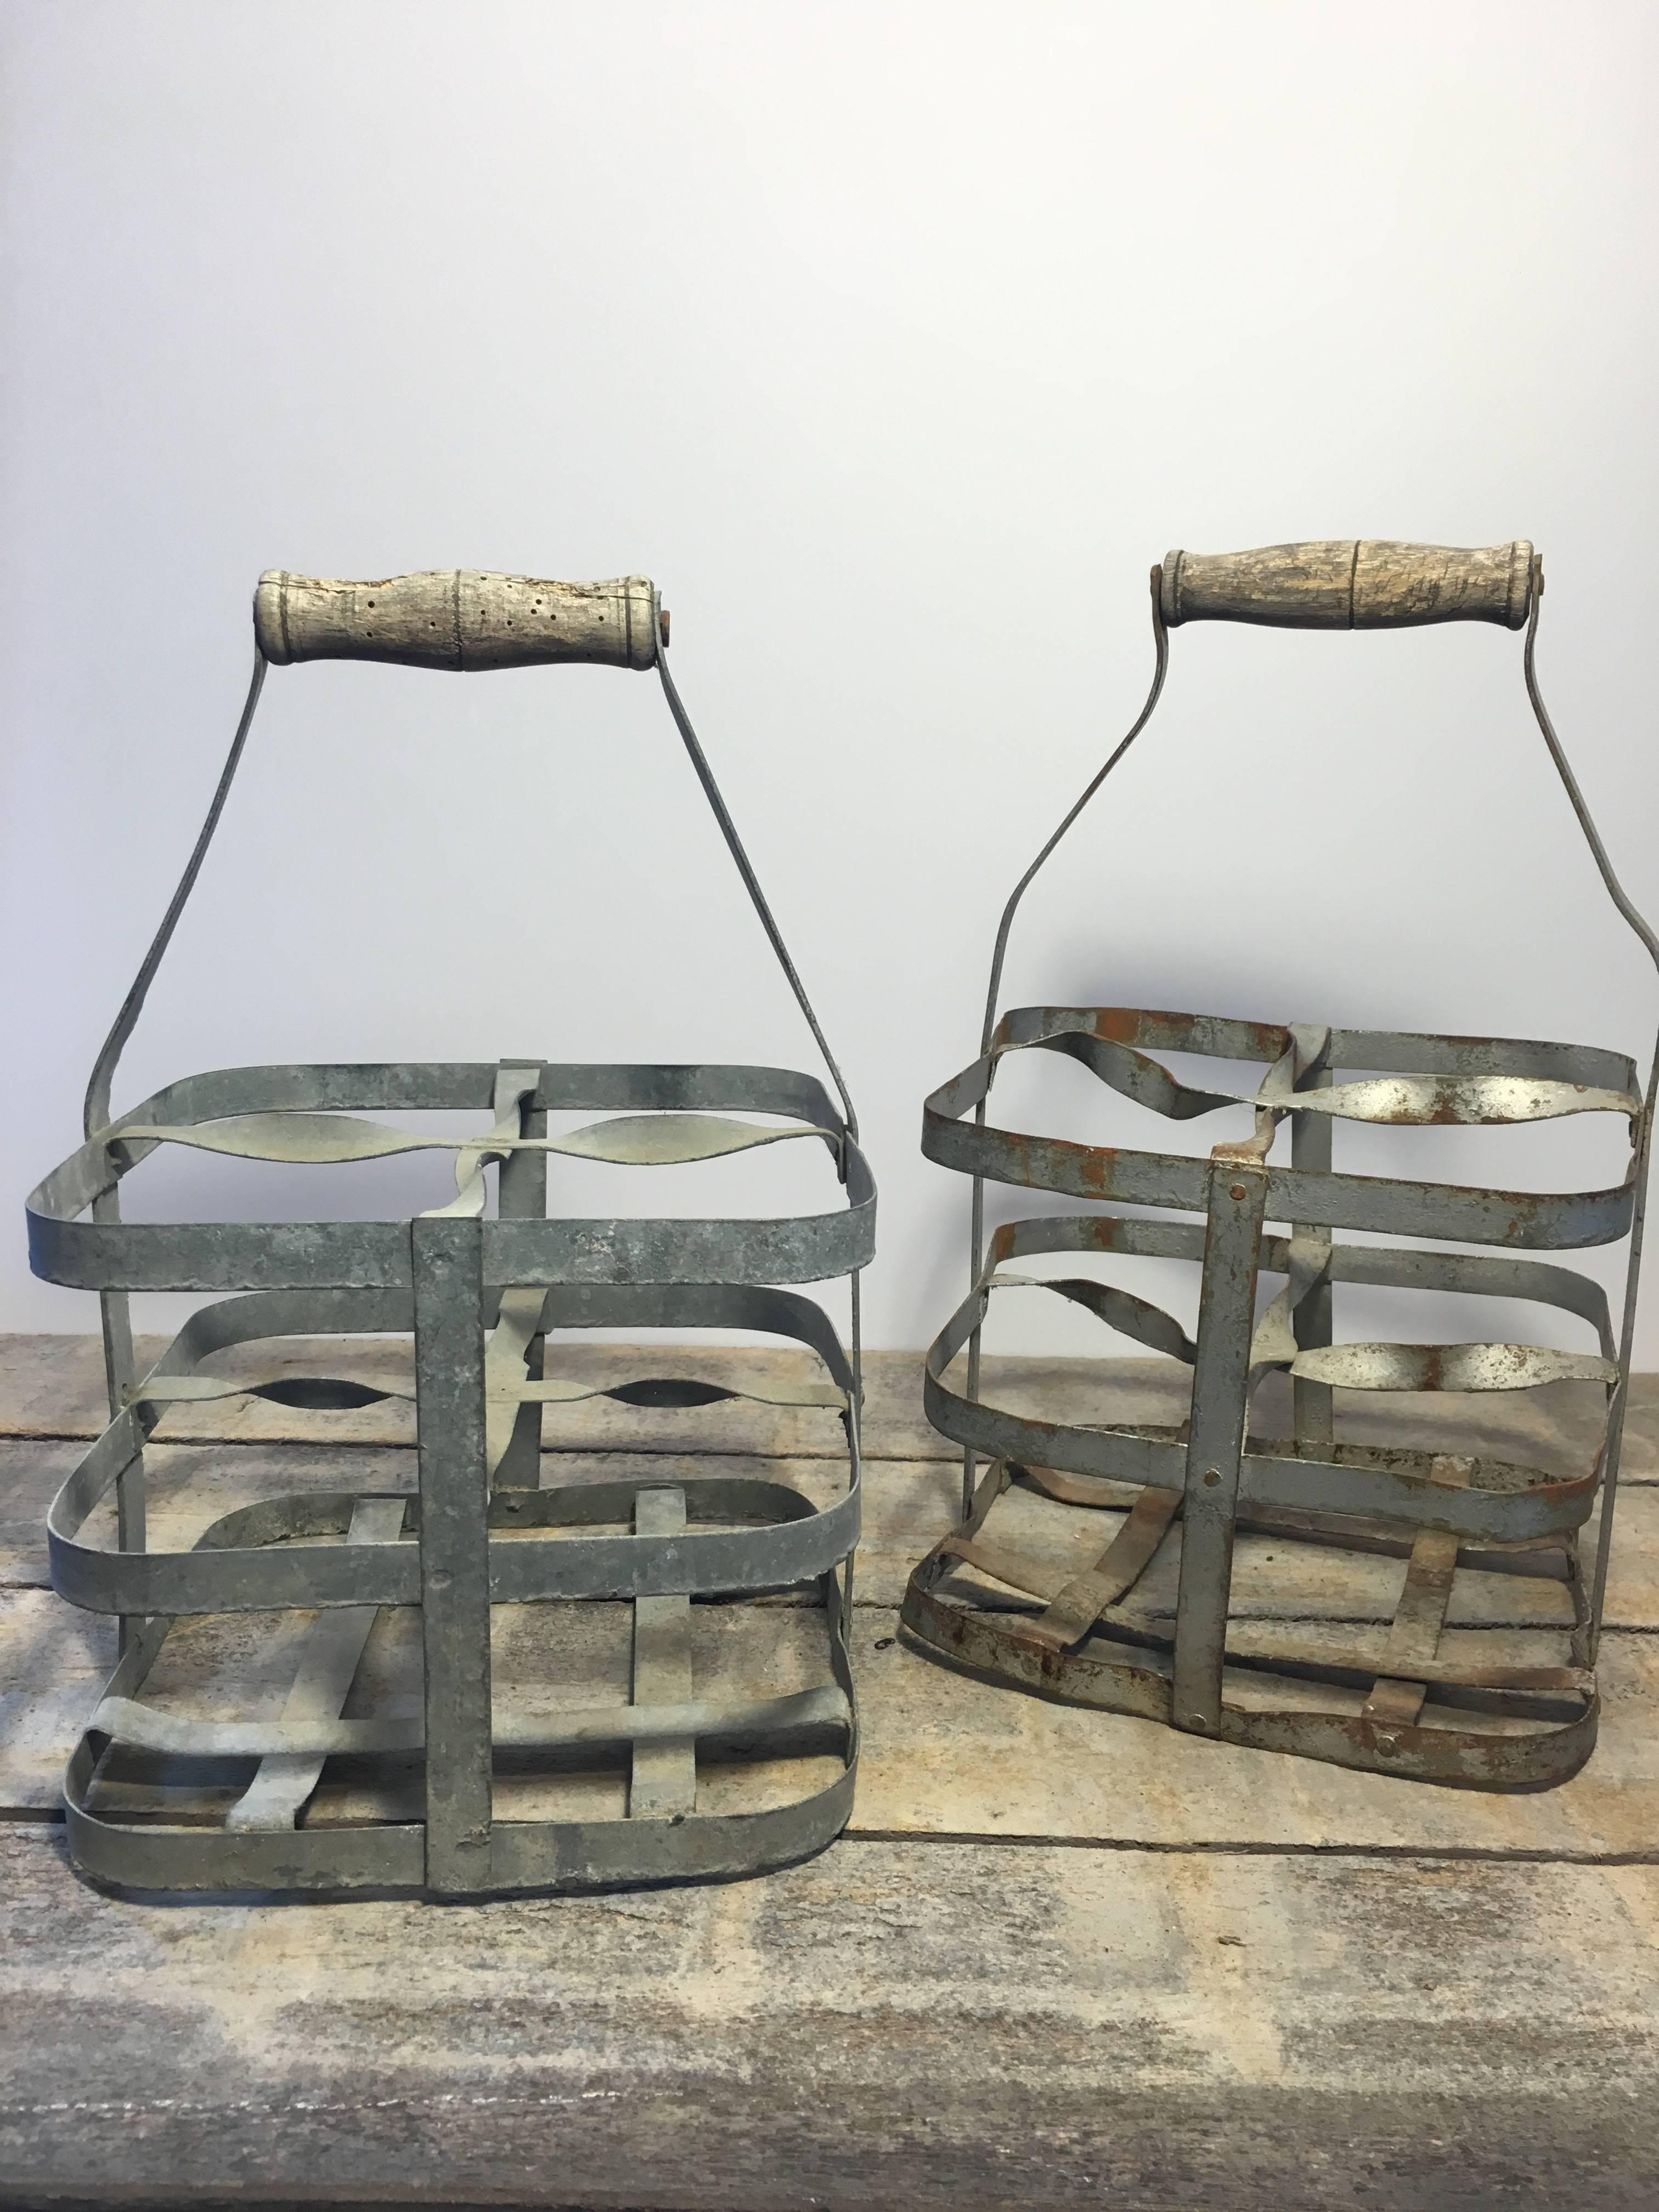 Early 20th Century Vintage French Four-Bottle Wine Carrier Baskets For Sale 5